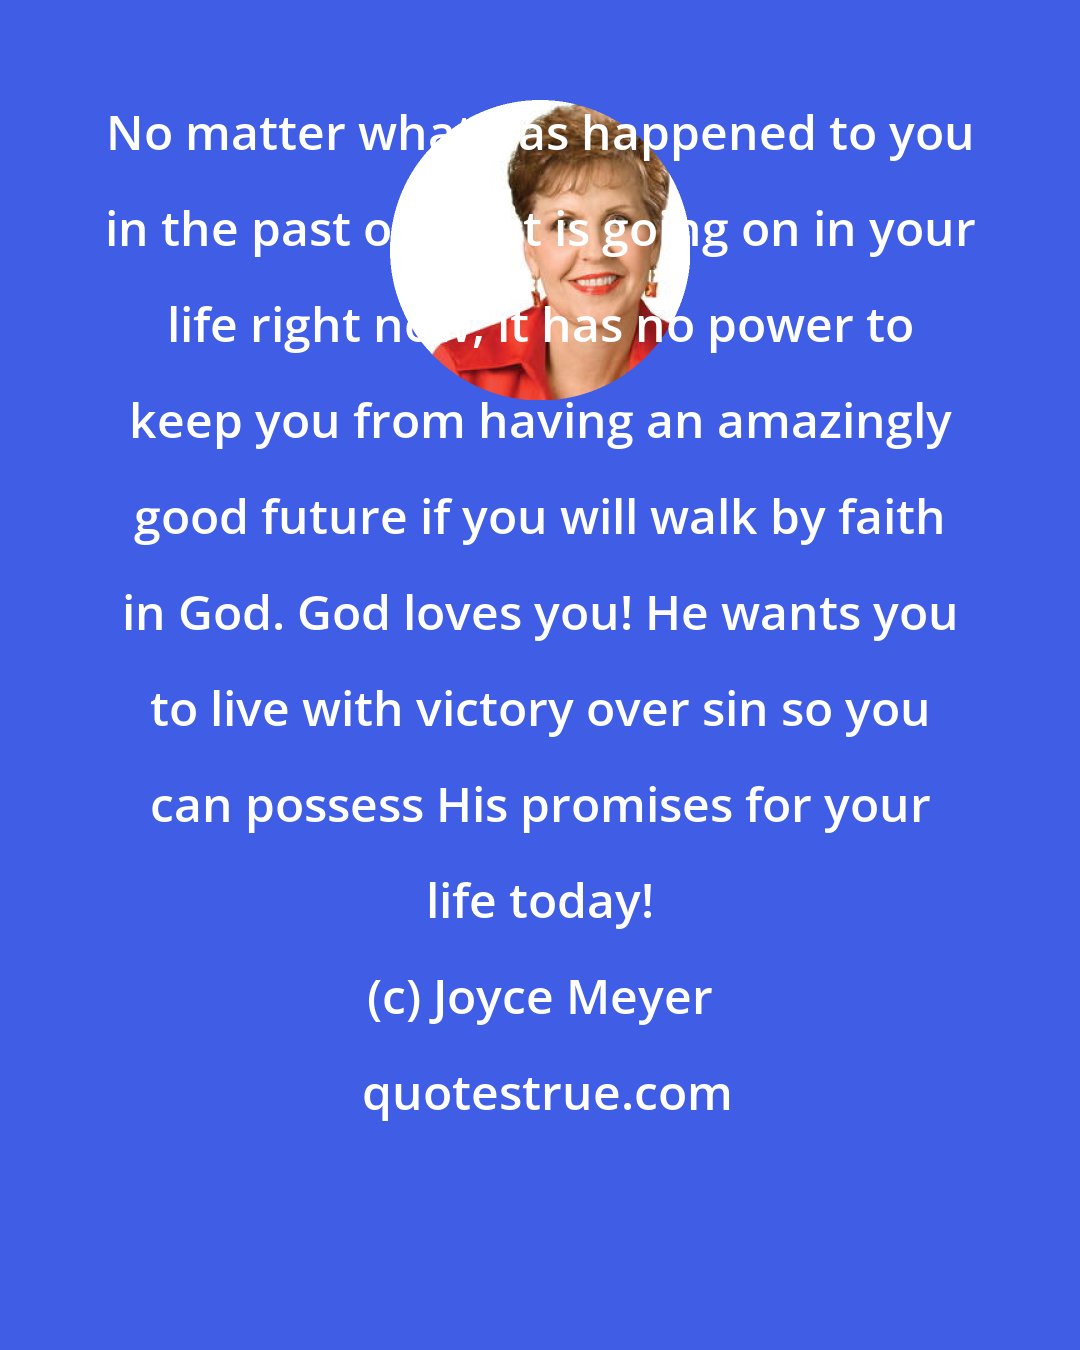 Joyce Meyer: No matter what has happened to you in the past or what is going on in your life right now, it has no power to keep you from having an amazingly good future if you will walk by faith in God. God loves you! He wants you to live with victory over sin so you can possess His promises for your life today!